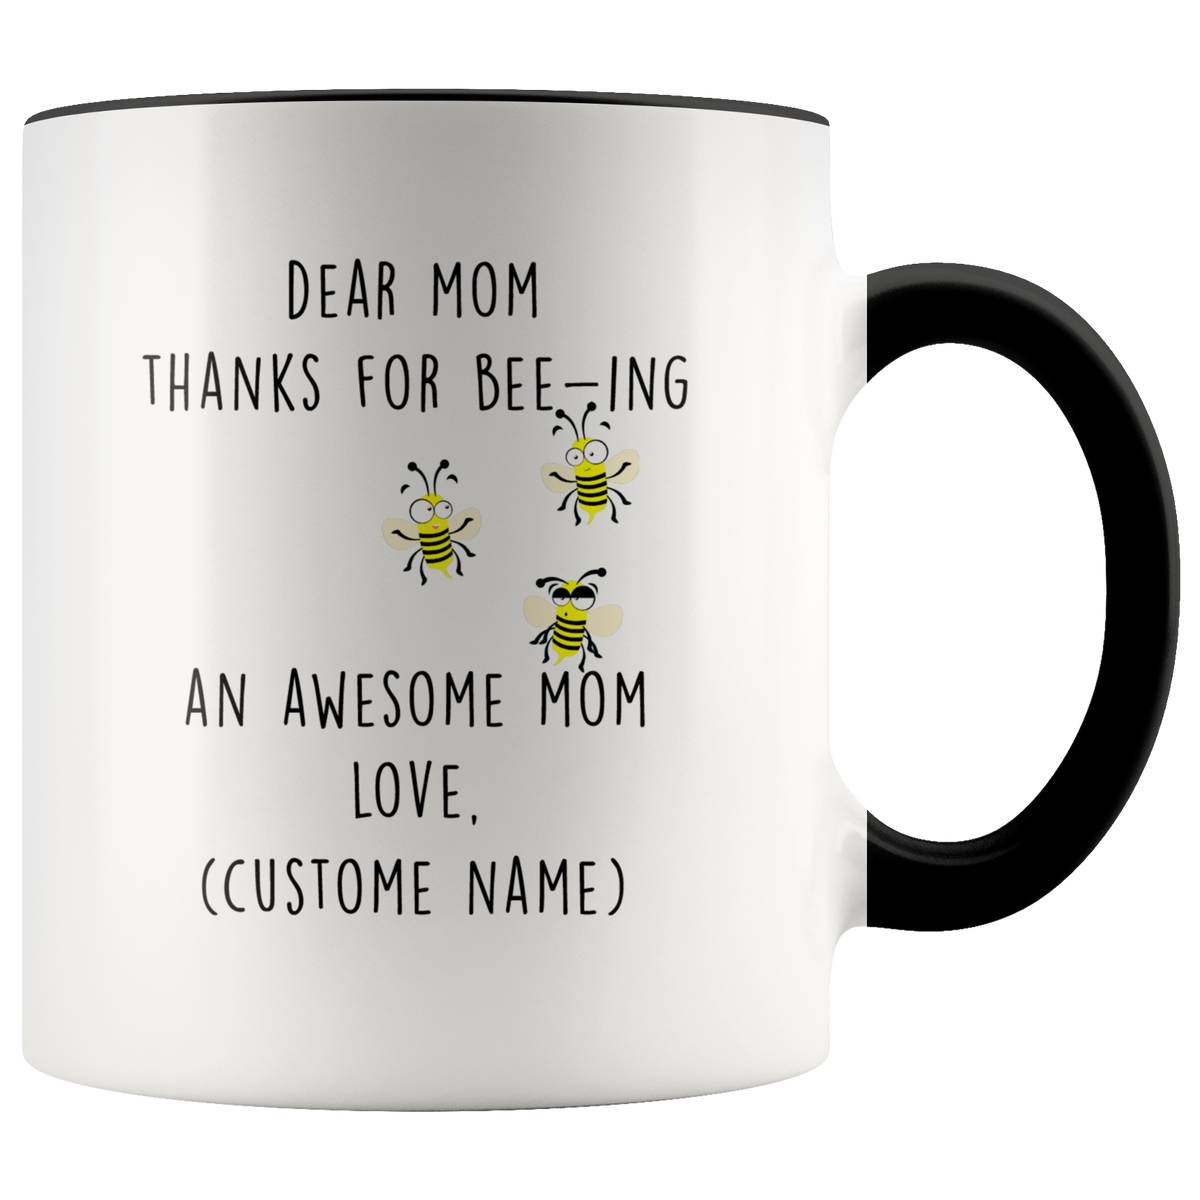 Personalized Mothers Day Mug Gift For Mom - Dear Mom Thanks For Bee ing An Awesome Mom Accent Coffee Mug 11oz